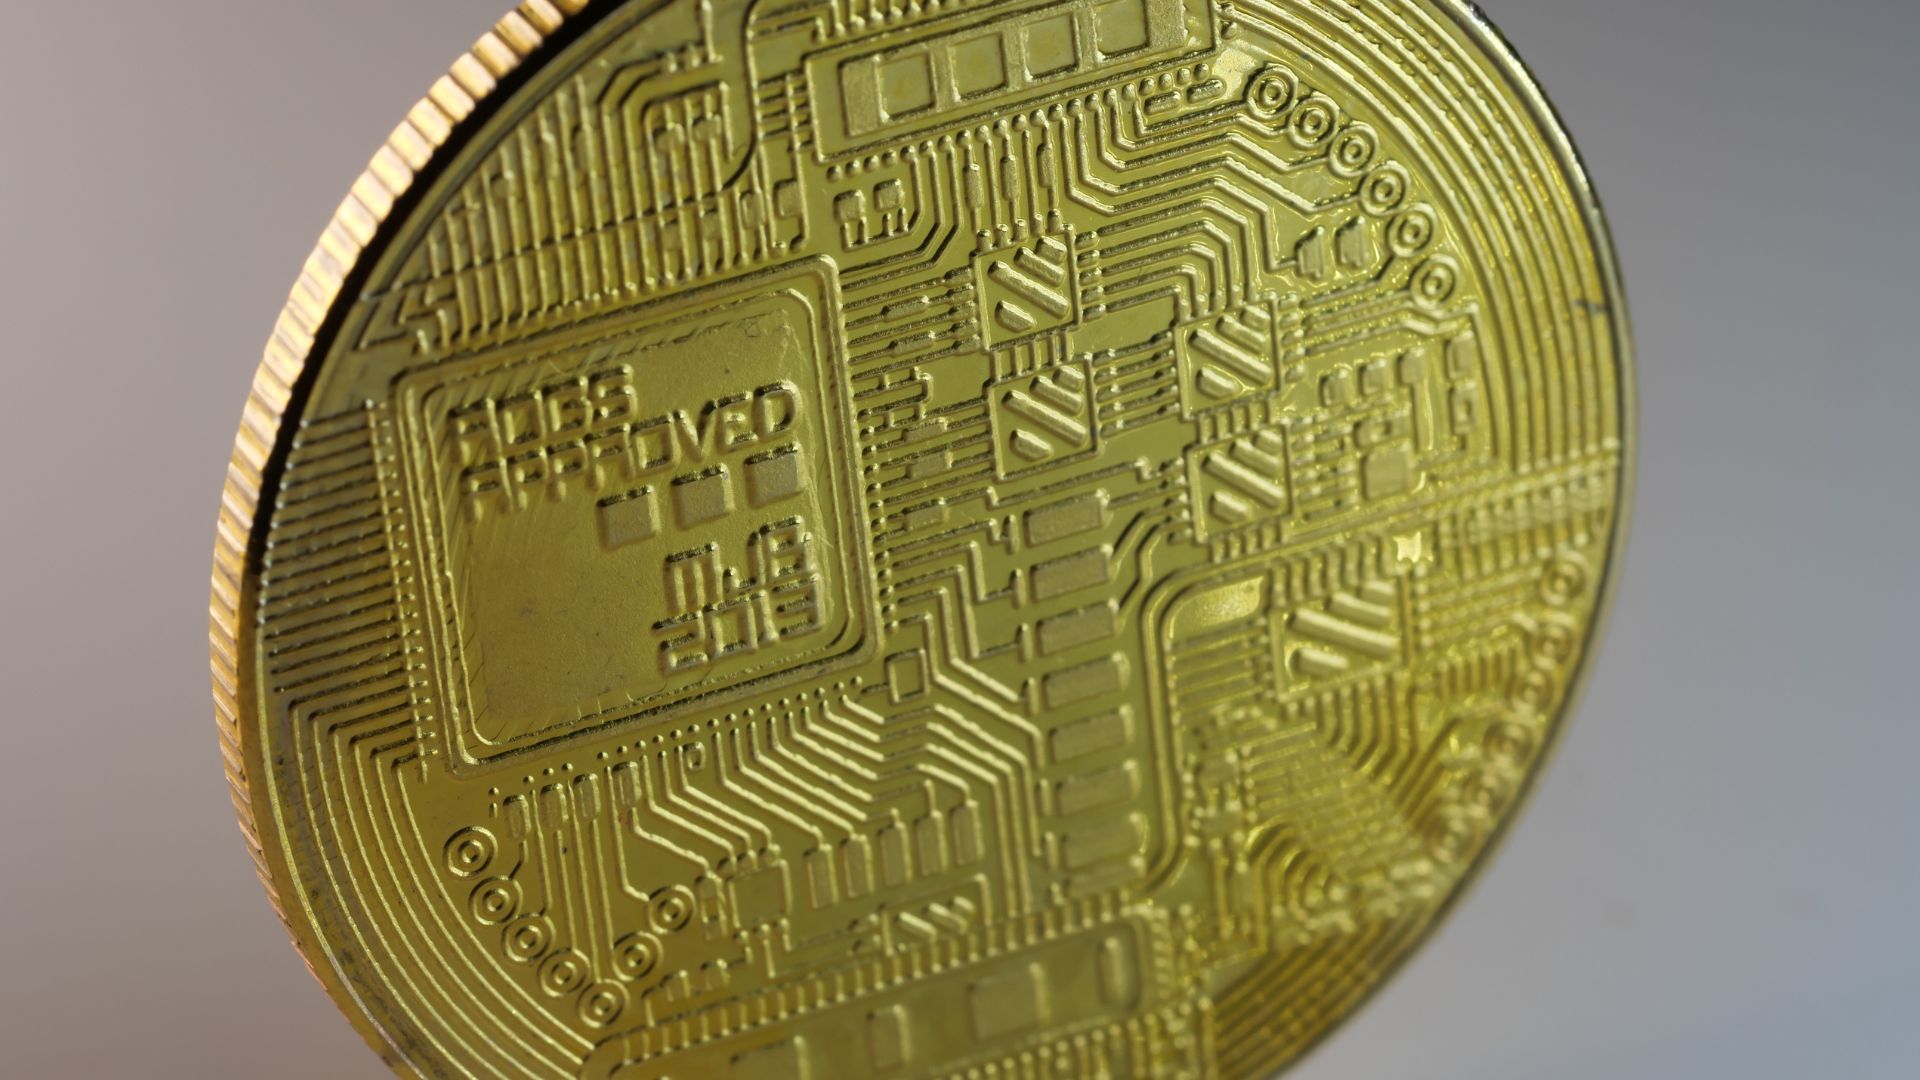 back side of gold backed cryptocurrency